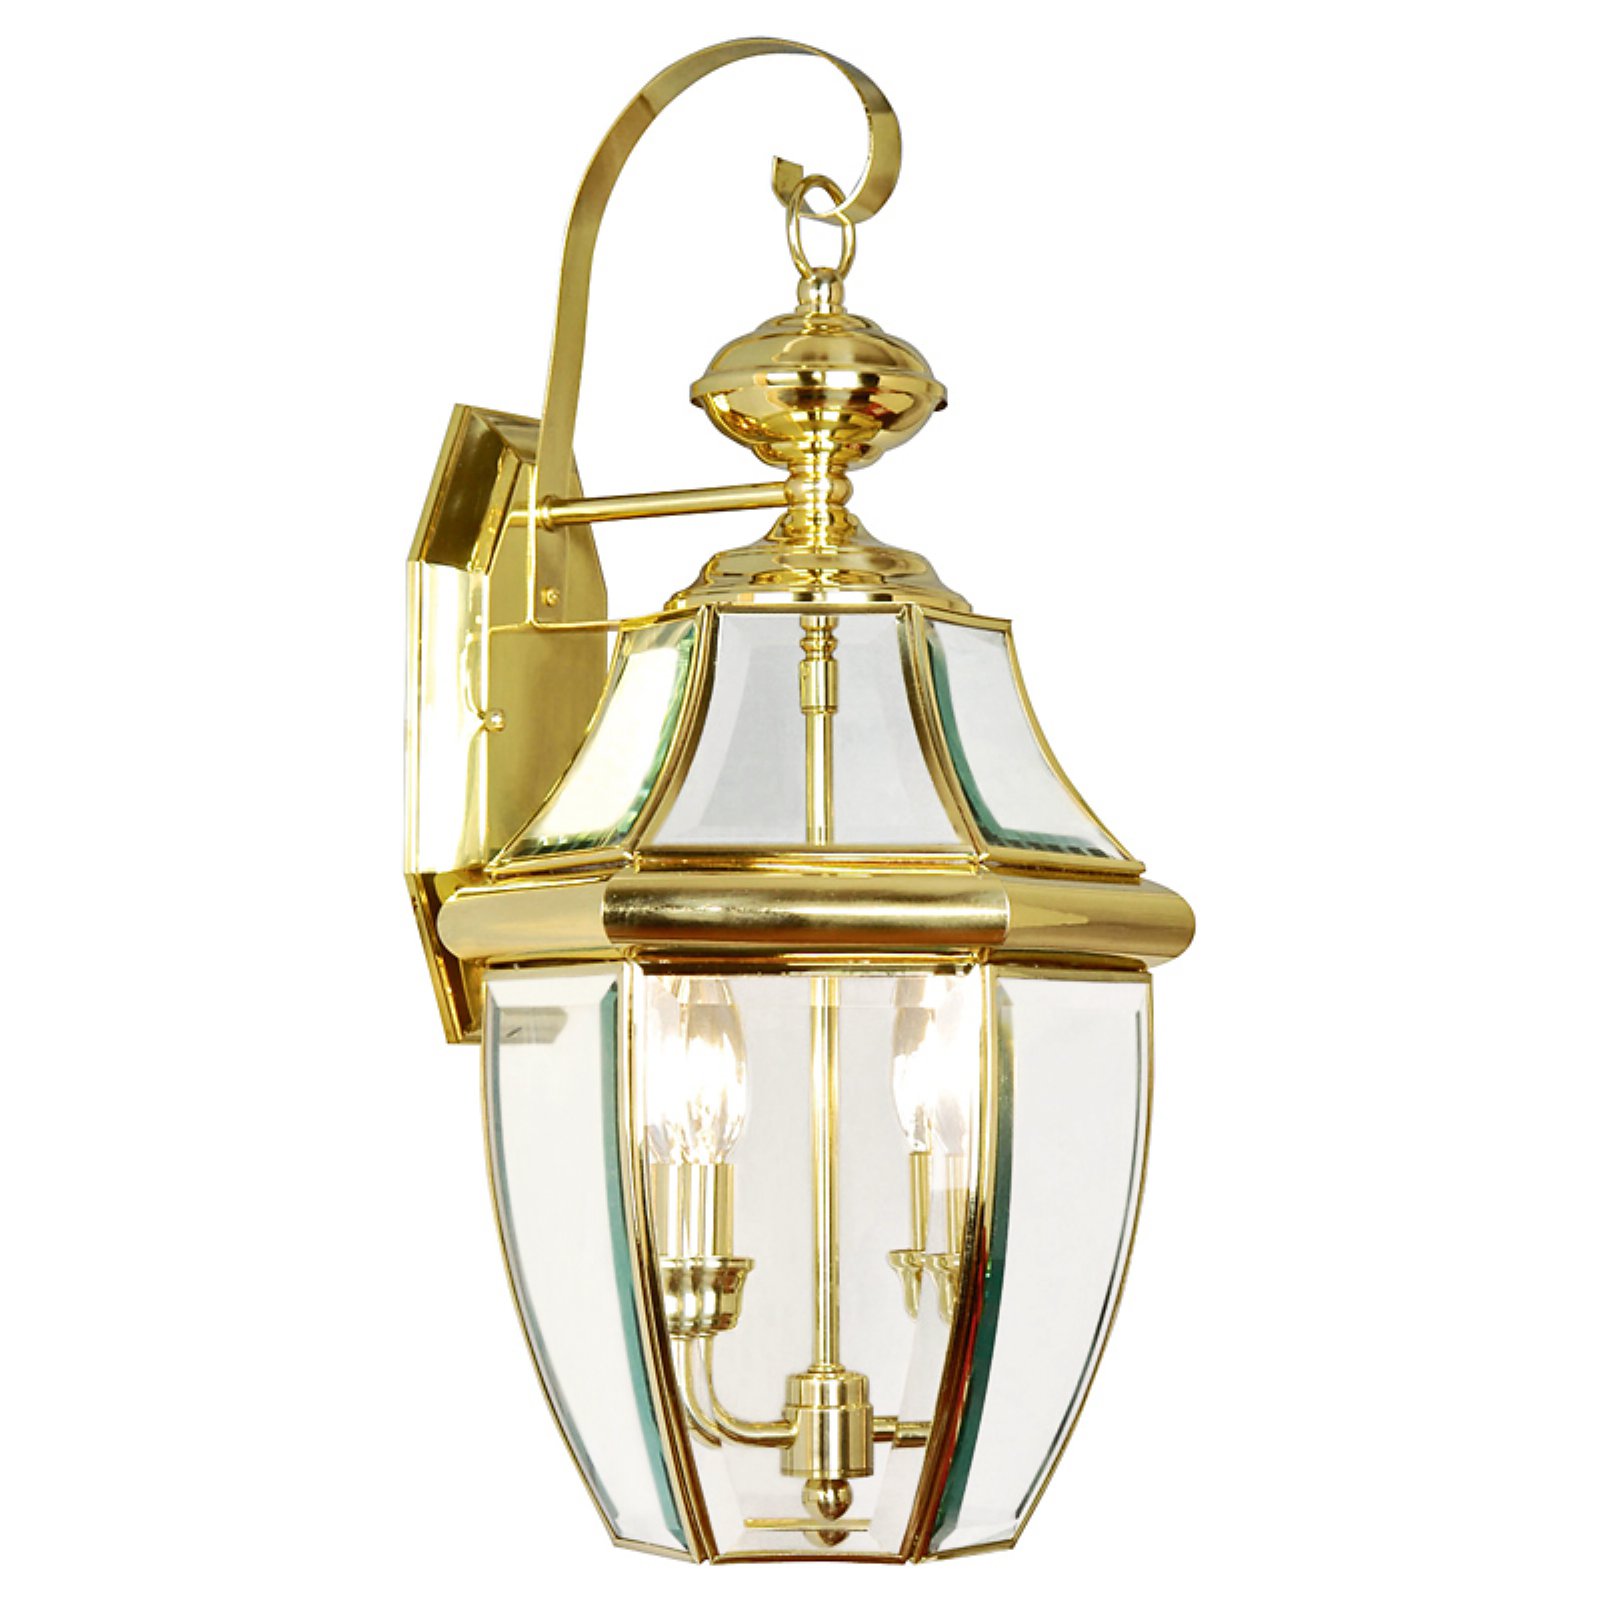 Livex Monterey 2251 Wall Lantern 20.25H in. - image 1 of 2